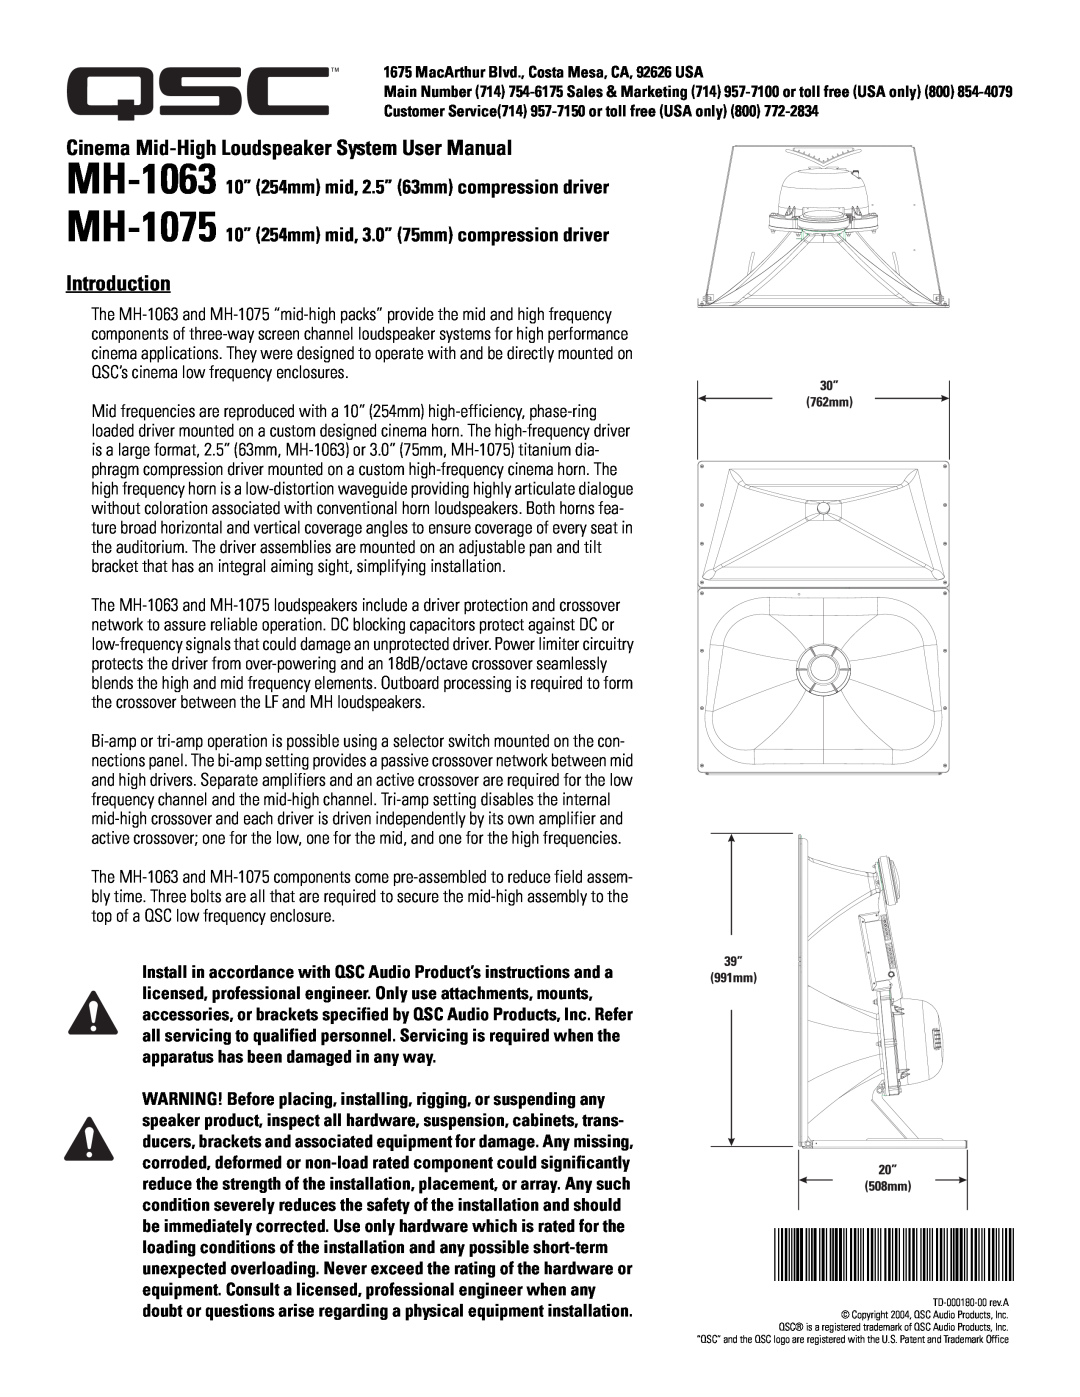 QSC Audio user manual Cinema Mid-High Loudspeaker System User Manual, Introduction, TD-000180-00, MH-1063 MH-1075 